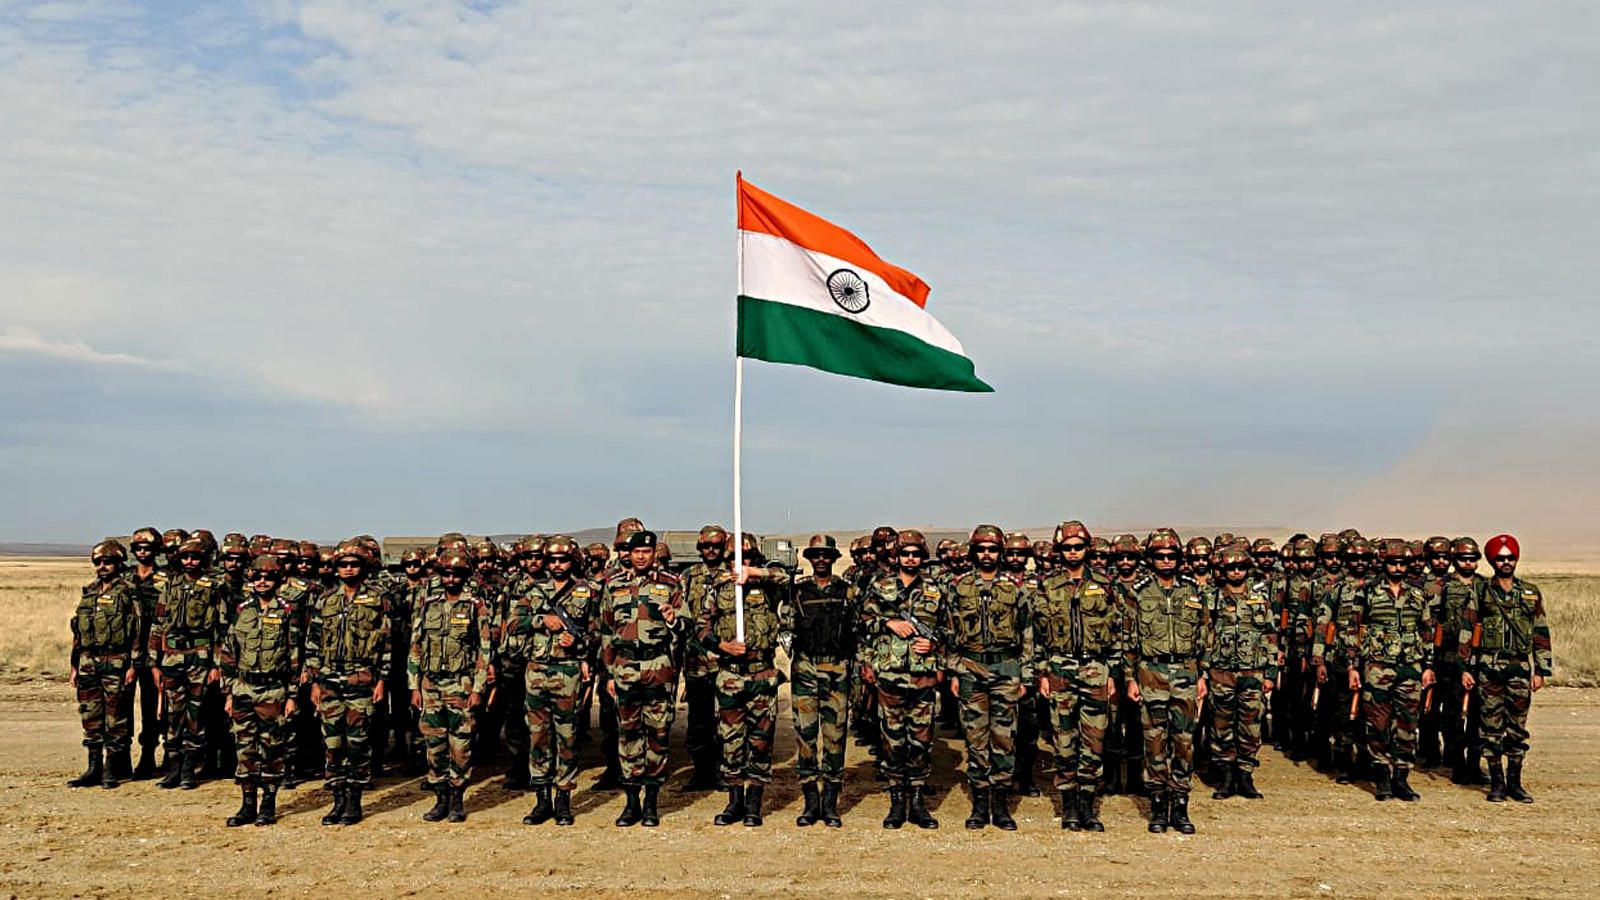 Tsentr 2019: Indian Army participates in multinational military exercise in Russia. International of India Videos